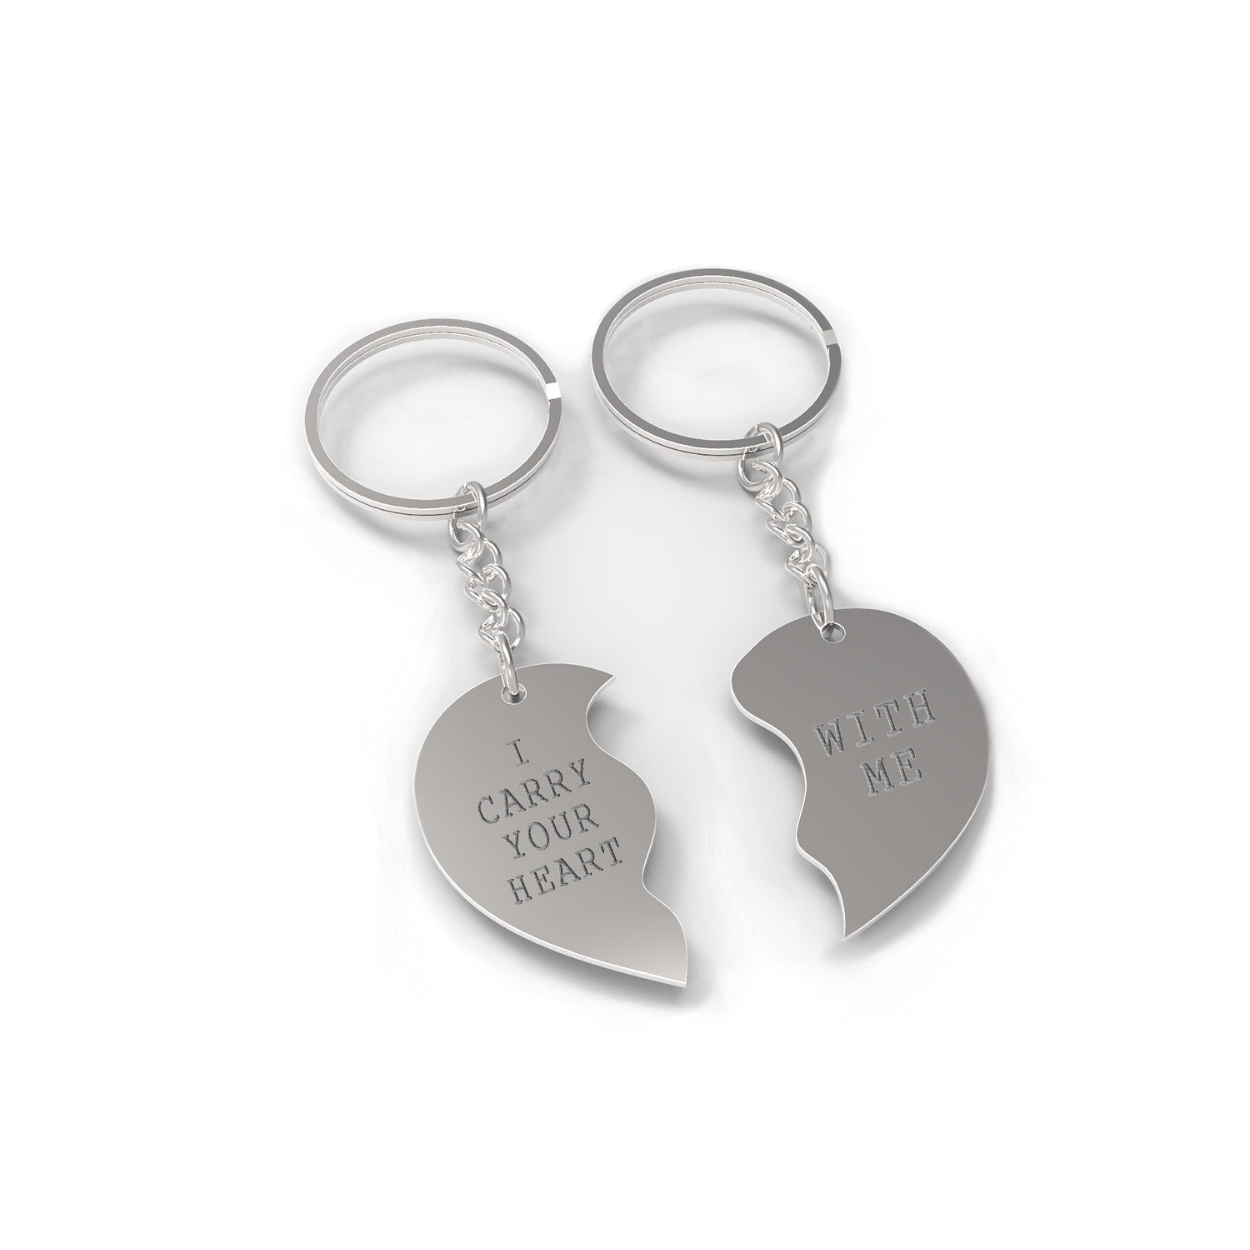 I Carry Your Heart With Me Half Hearts Couple Keychains Matching Key Ring